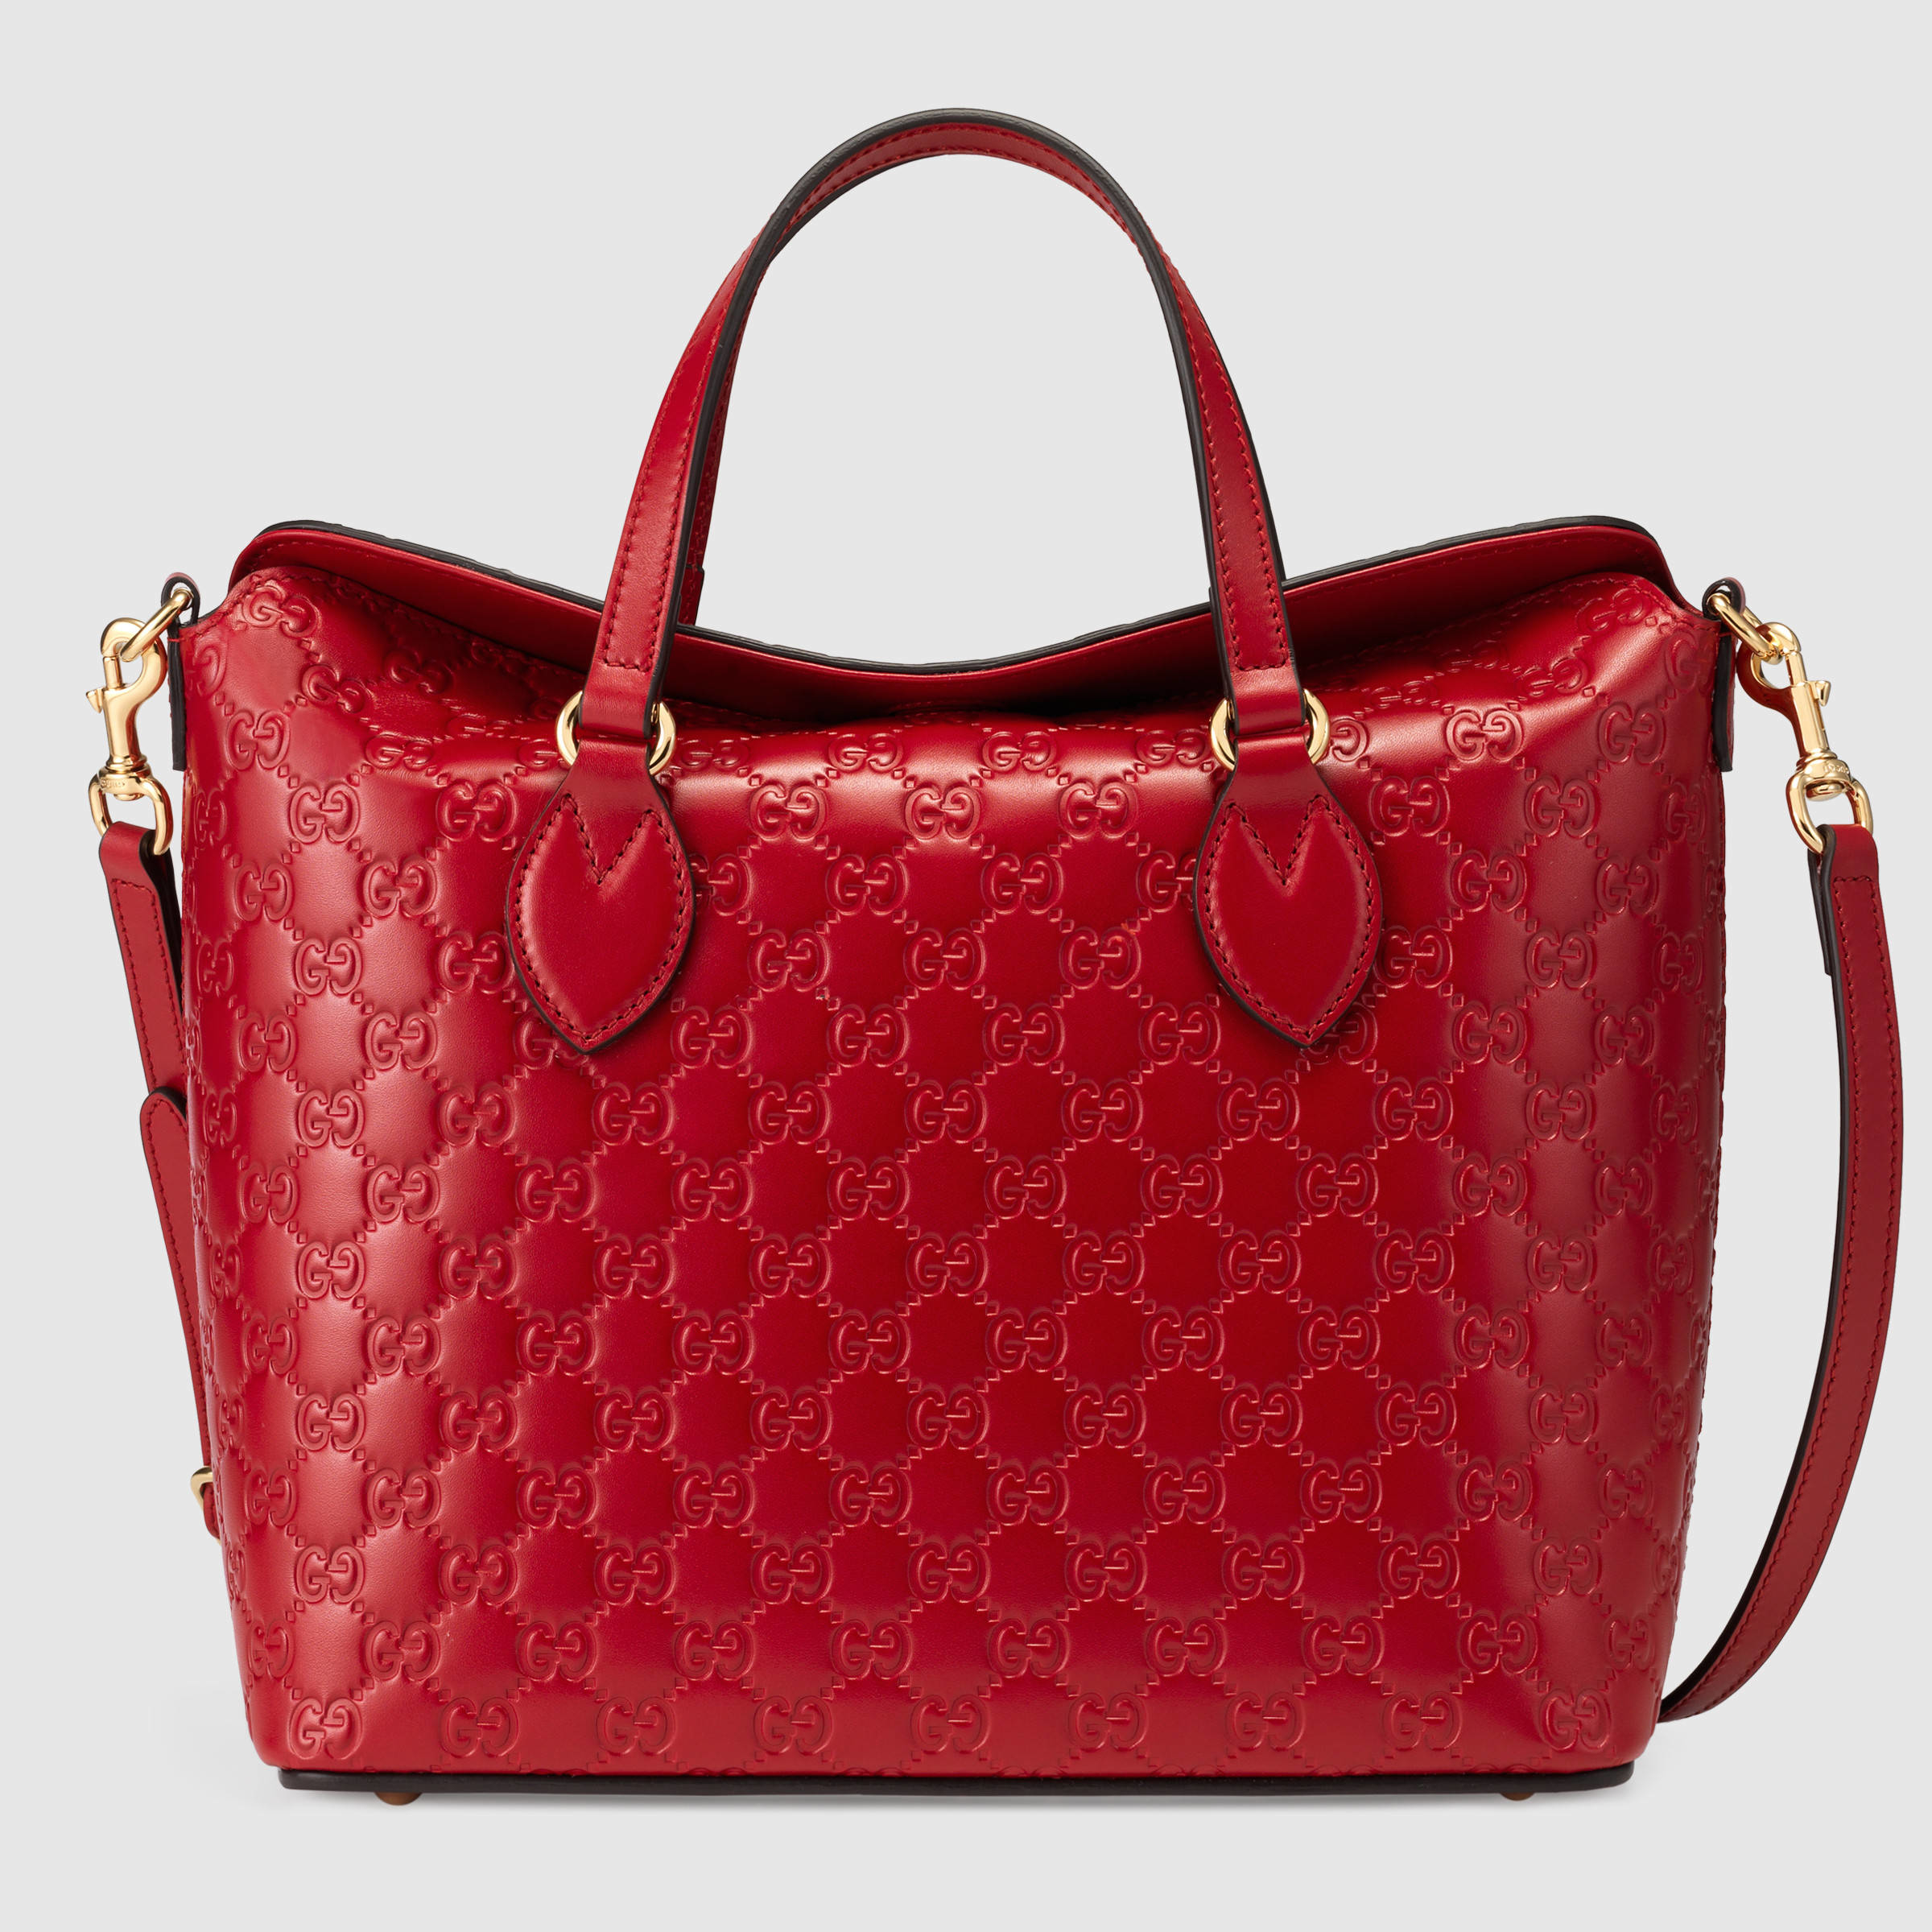 Gucci Signature Leather Top Handle Bag in Red - Lyst